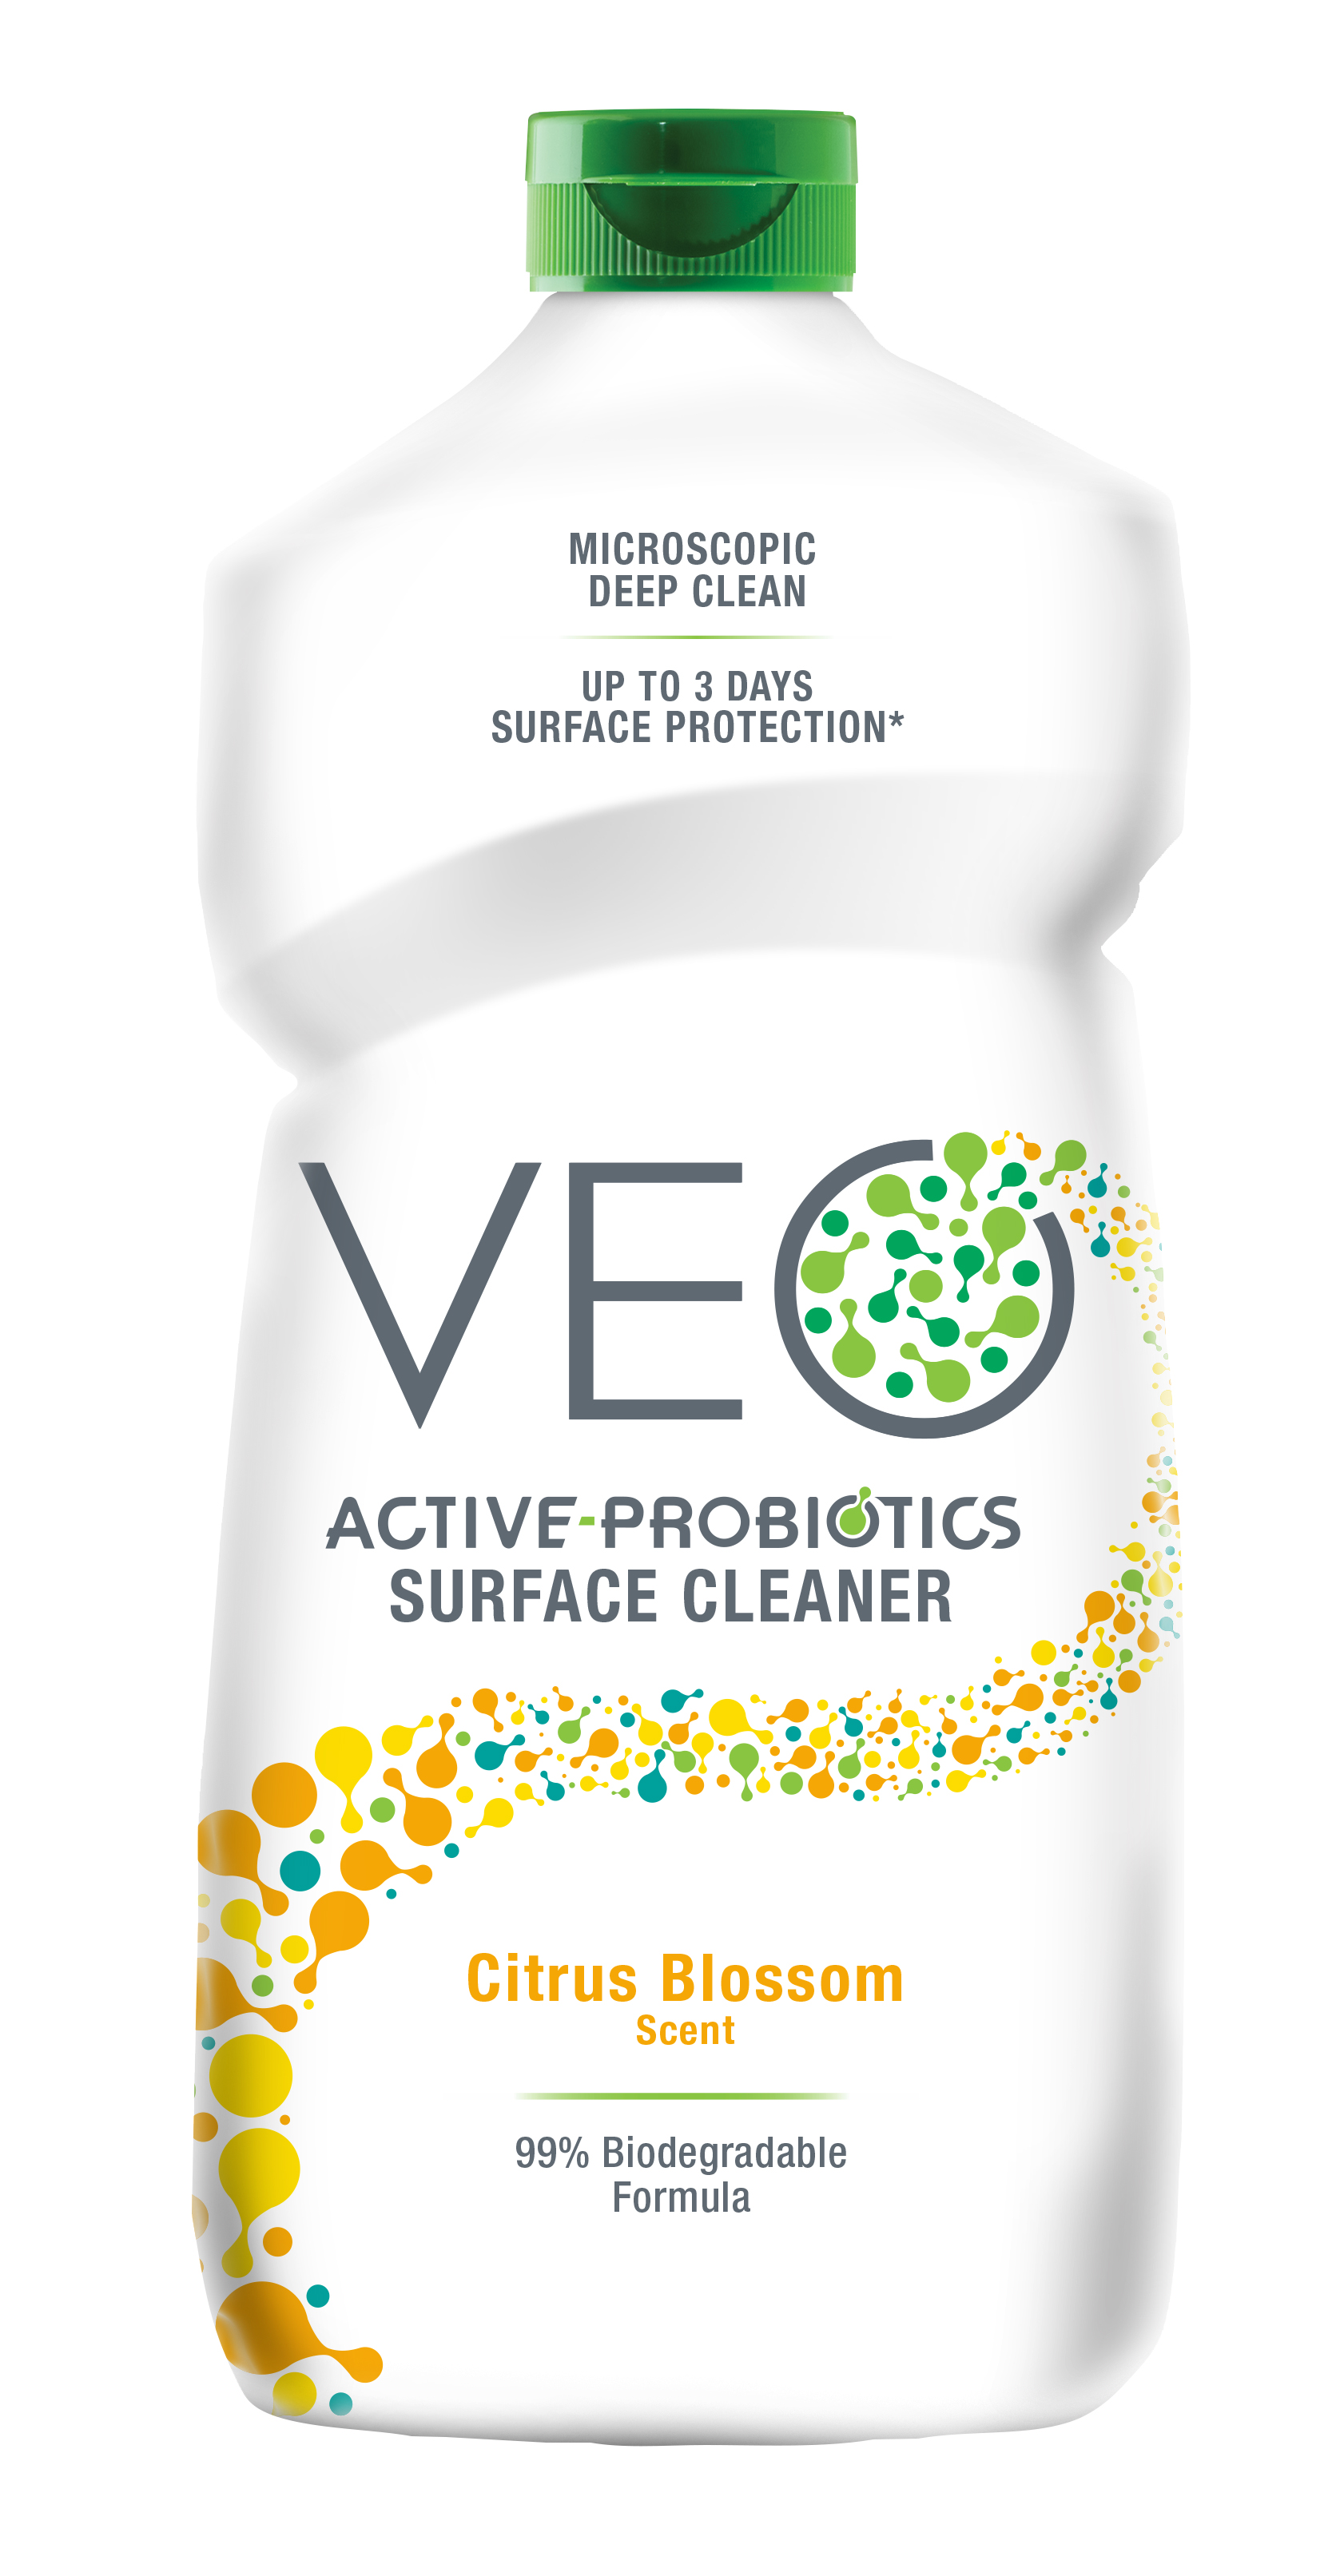 Veo ActiveProbiotics Surface Cleaner  Citrus Blossom Scent Discontinued